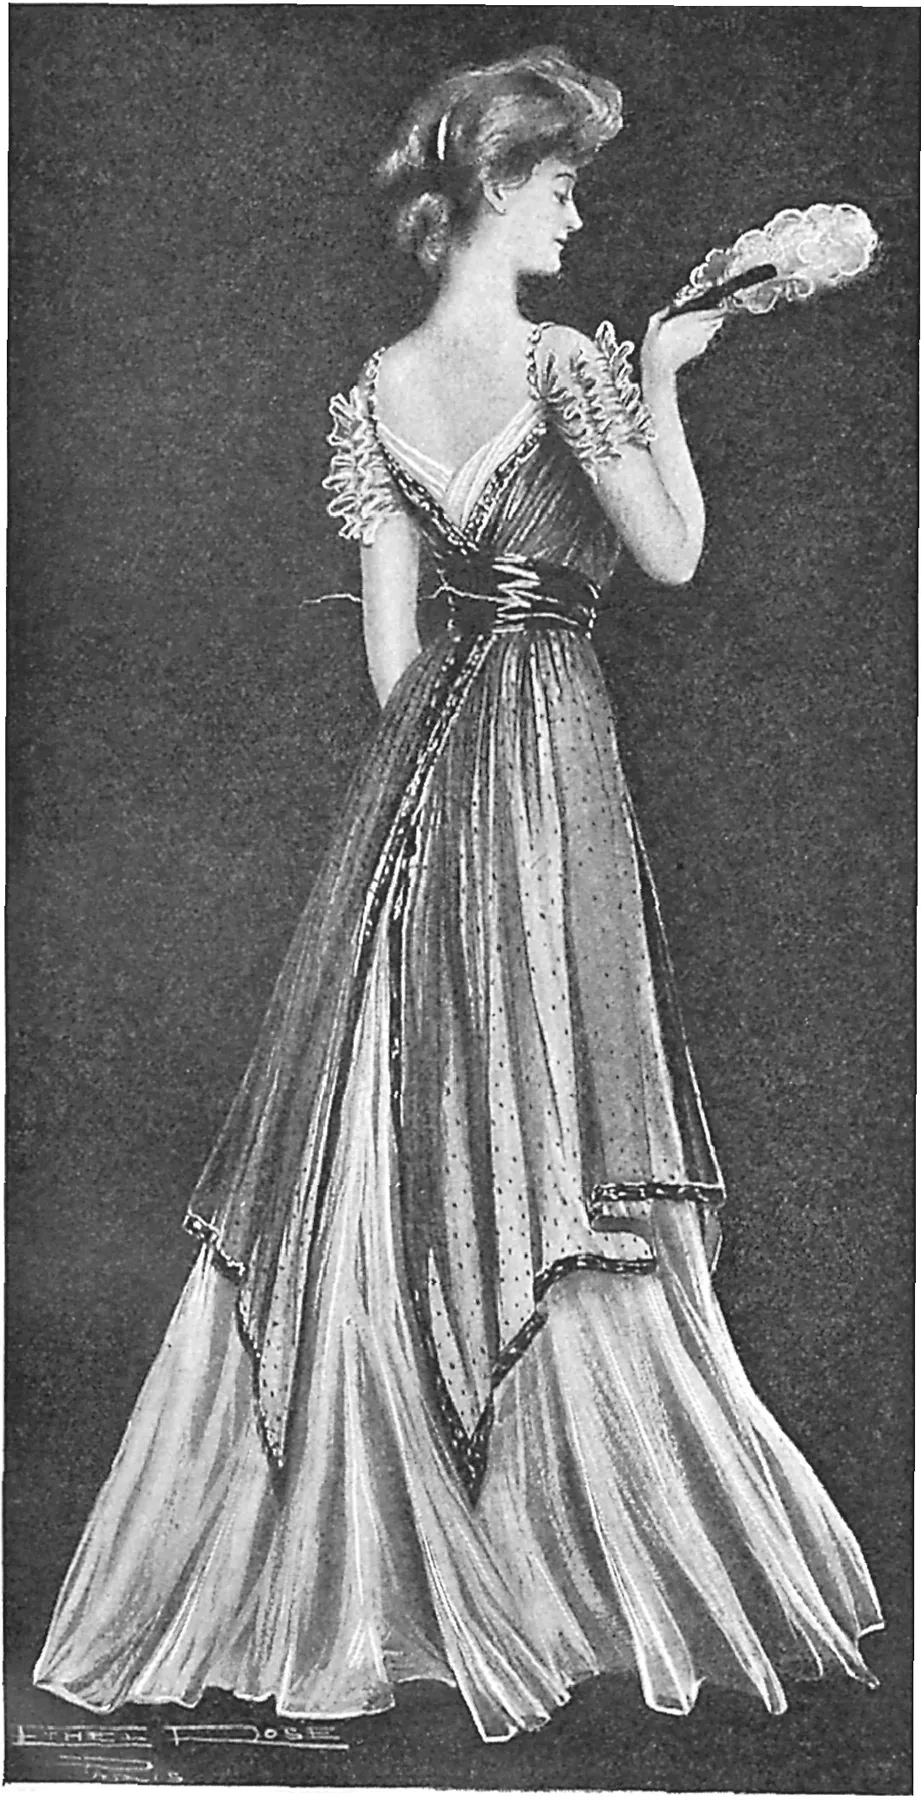 Edwardian Fashions: A Snapshot in Time from Harper's Bazar 1906